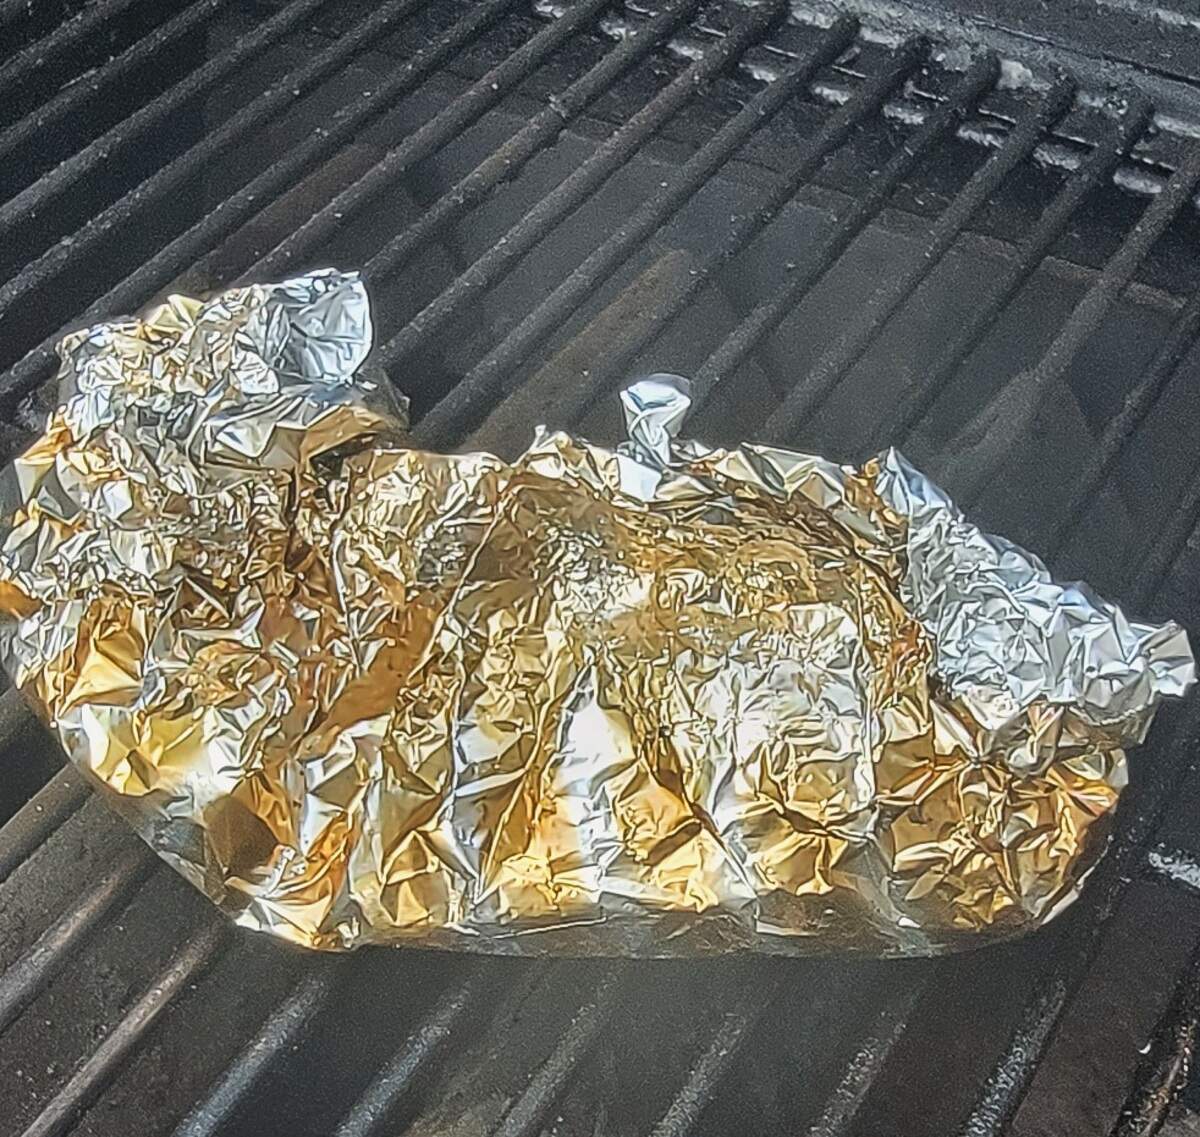 foil packet wrapped up tight containing beets on smoker grate